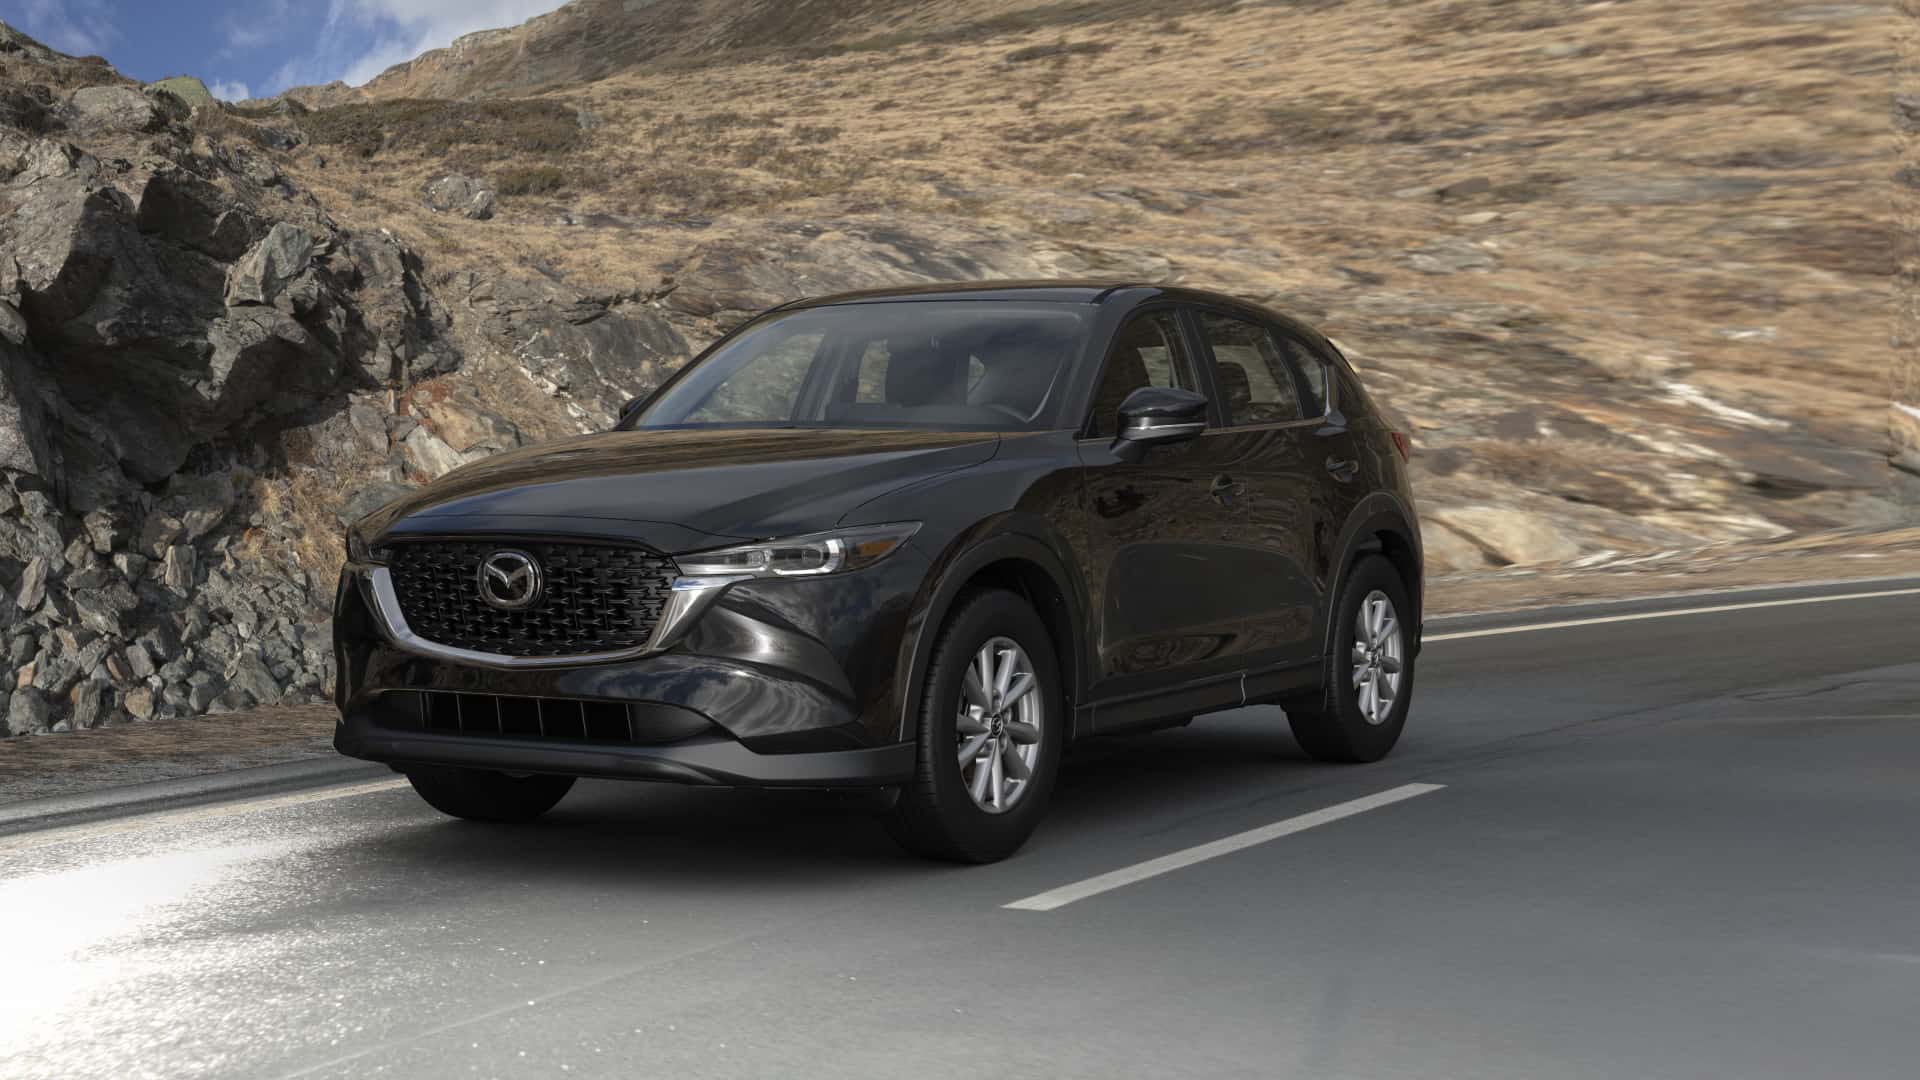 2023 Mazda CX-5 2.5 S Deep Crystal Blue Mica | Neil Huffman Mazda in Louisville KY